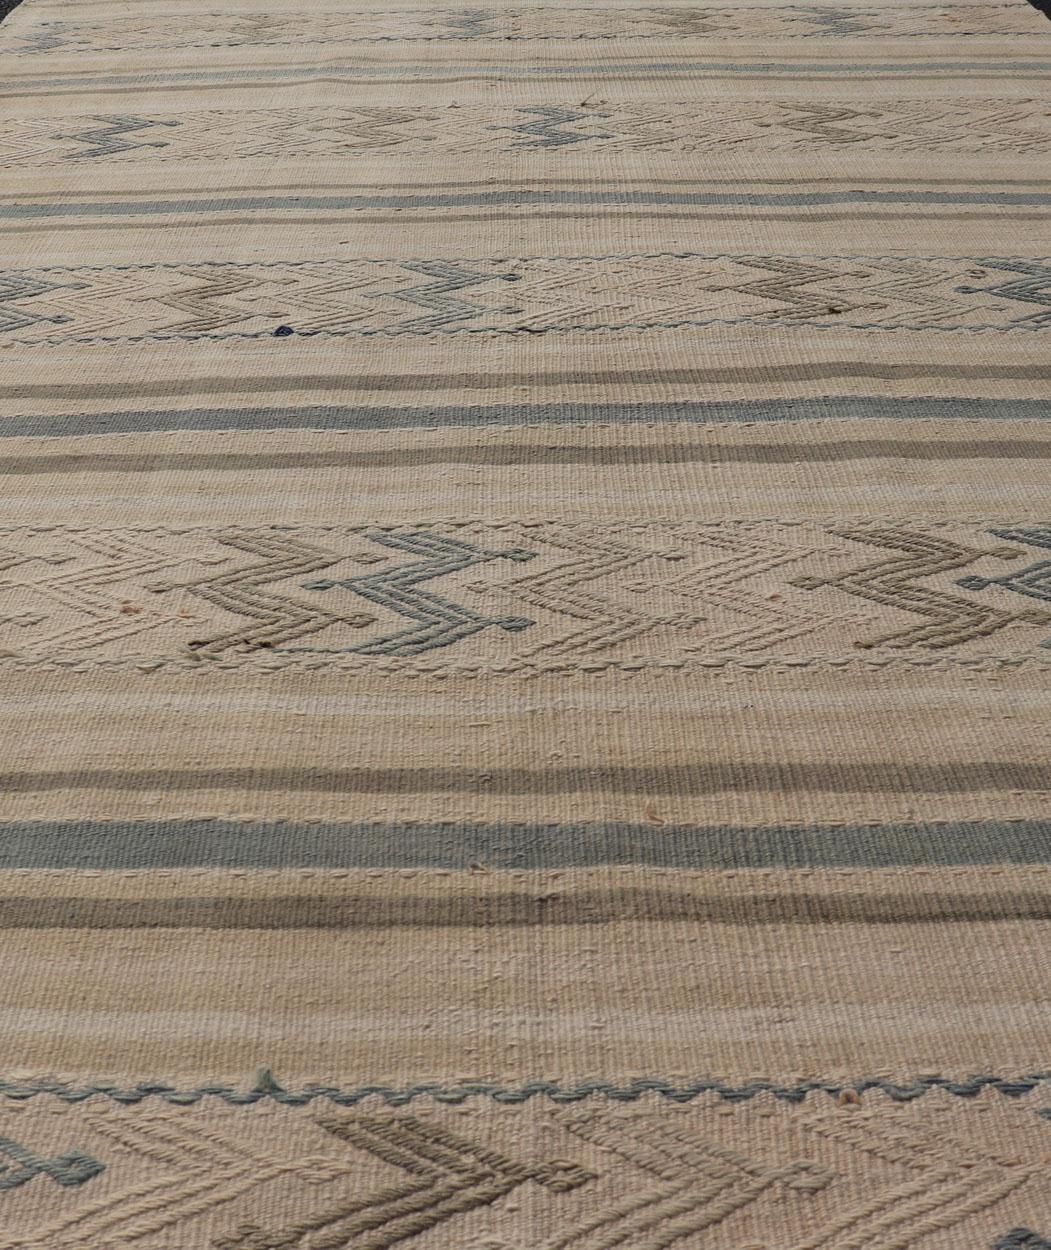 Kilim Vintage Turkish Flat-Weave with Embroideries in Earth Tones and Blue For Sale